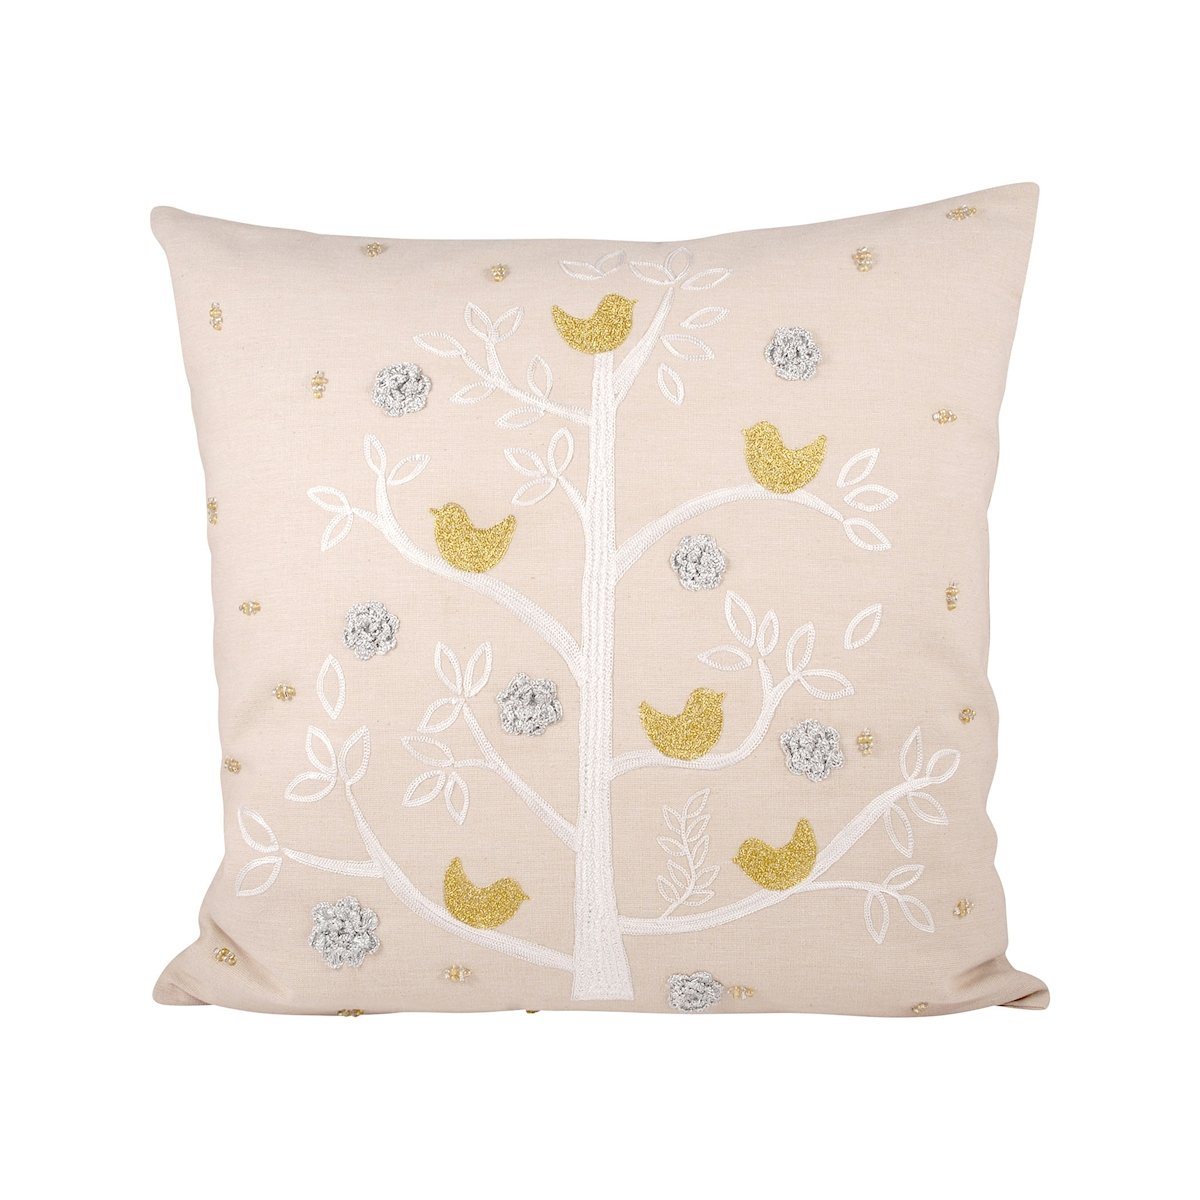 Holiday Partridge Pillow 20X20in Accessories Pomeroy 